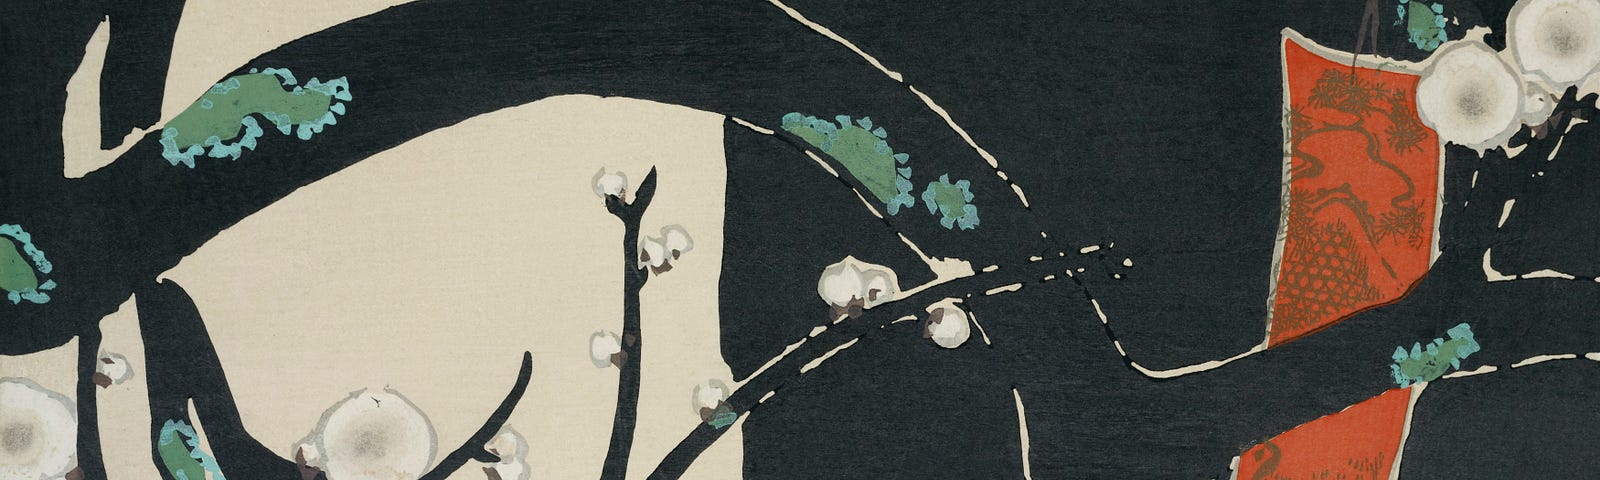 Traditional Japanese print of black tree brancing in downward curve with white blossom and red o-mikuji tied to branch.